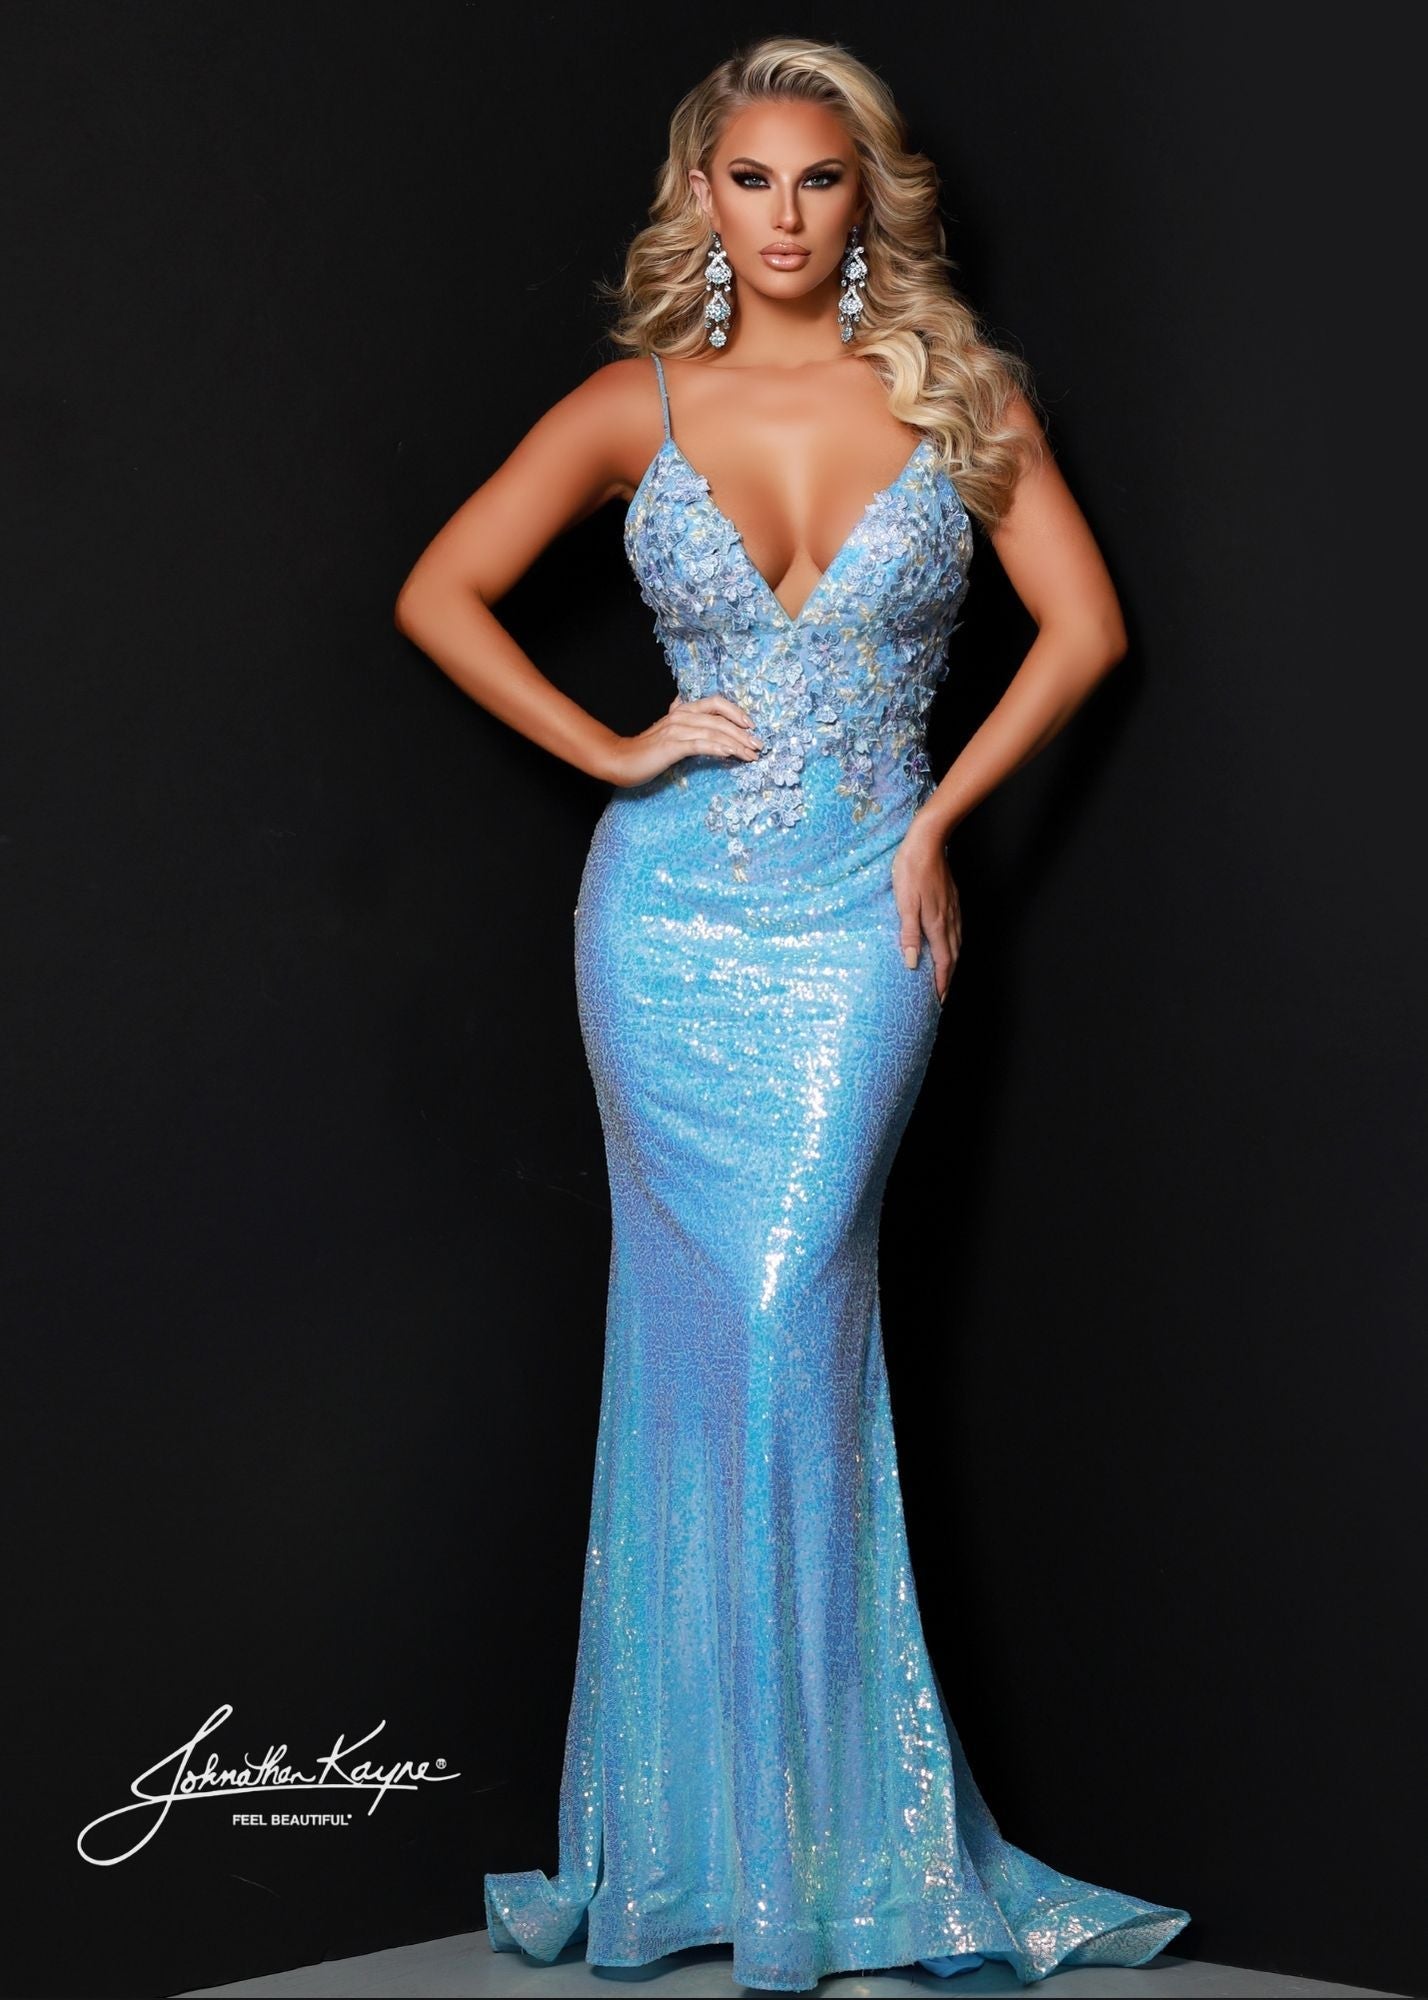 Johnathan Kayne 2531 Long Fitted Stretch Sequin Gown with 3d Lace embellished bodice and back. this Formal, Prom Dress & Pageant Gown Features a V Neckline and sweeping Train.  Sizes: 00, 0, 2, 4, 6, 8, 10, 12, 14, 16, 18, 20  Colors: Lilac, Peach, Powder Blue